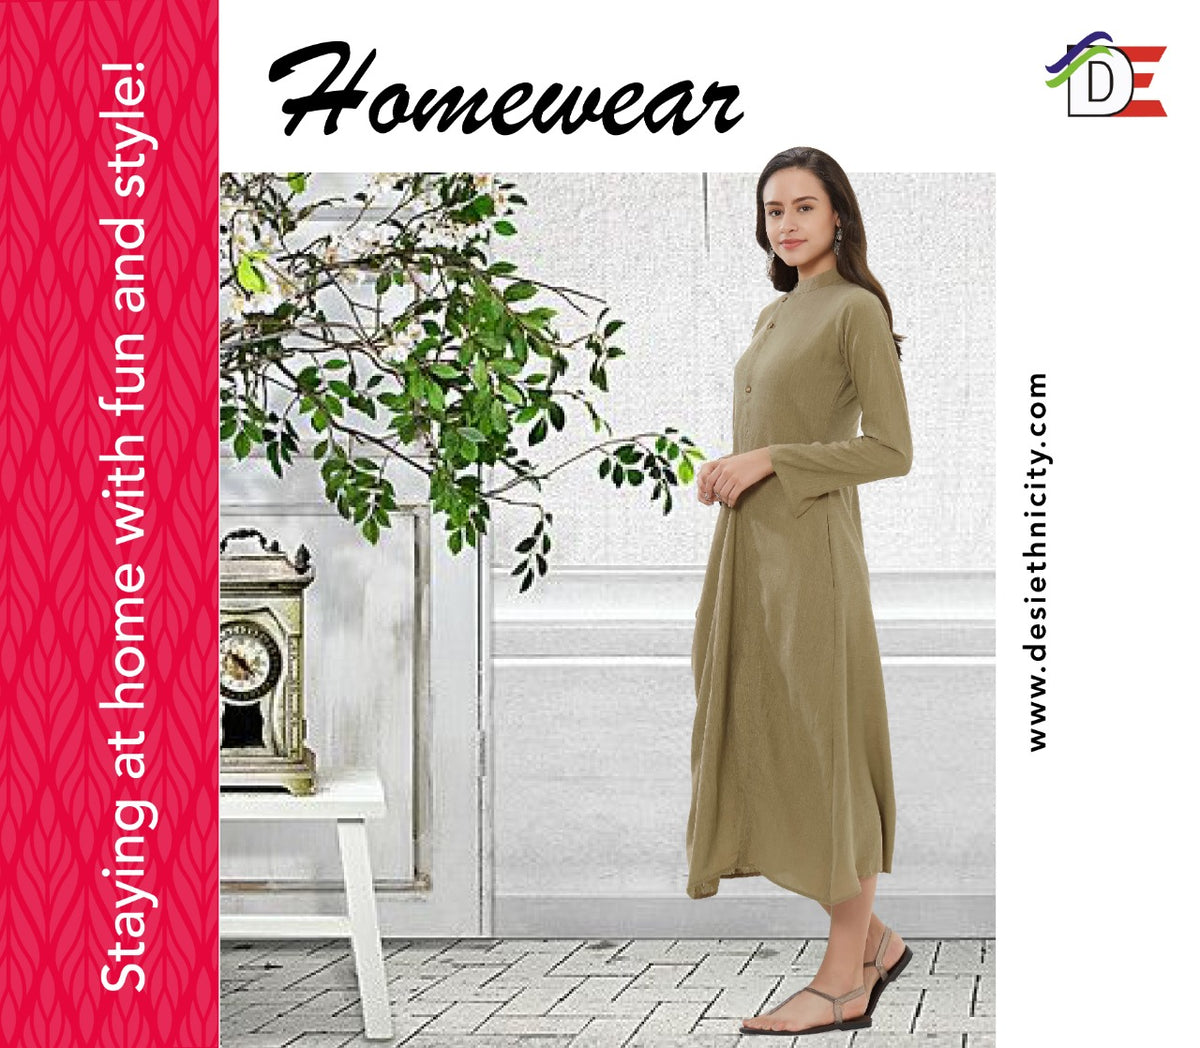 Homewear -Staying at home with fun and style!